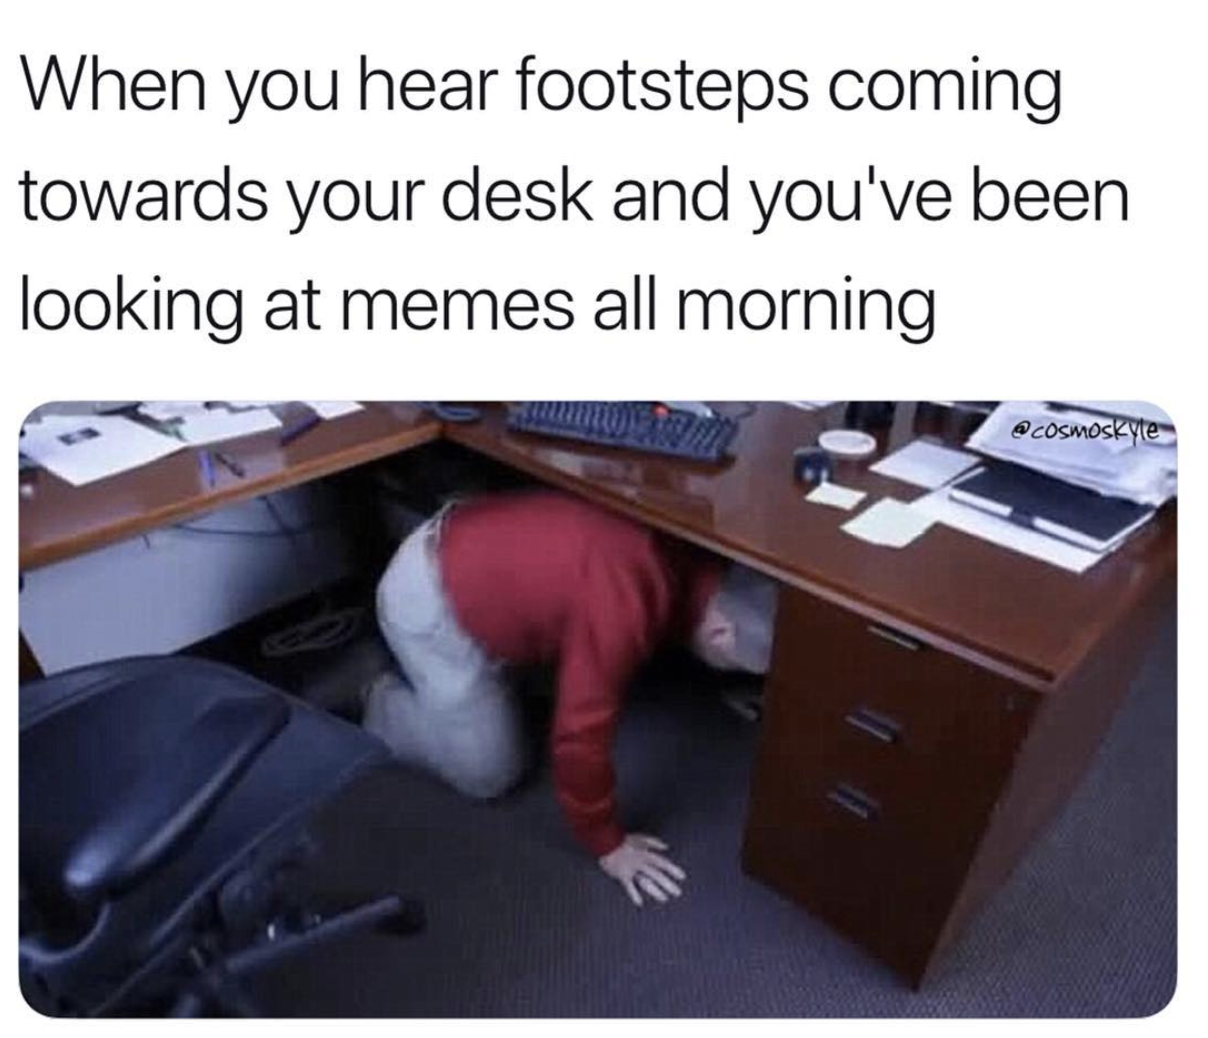 hiding at work meme - When you hear footsteps coming towards your desk and you've been looking at memes all morning cosmoskyte